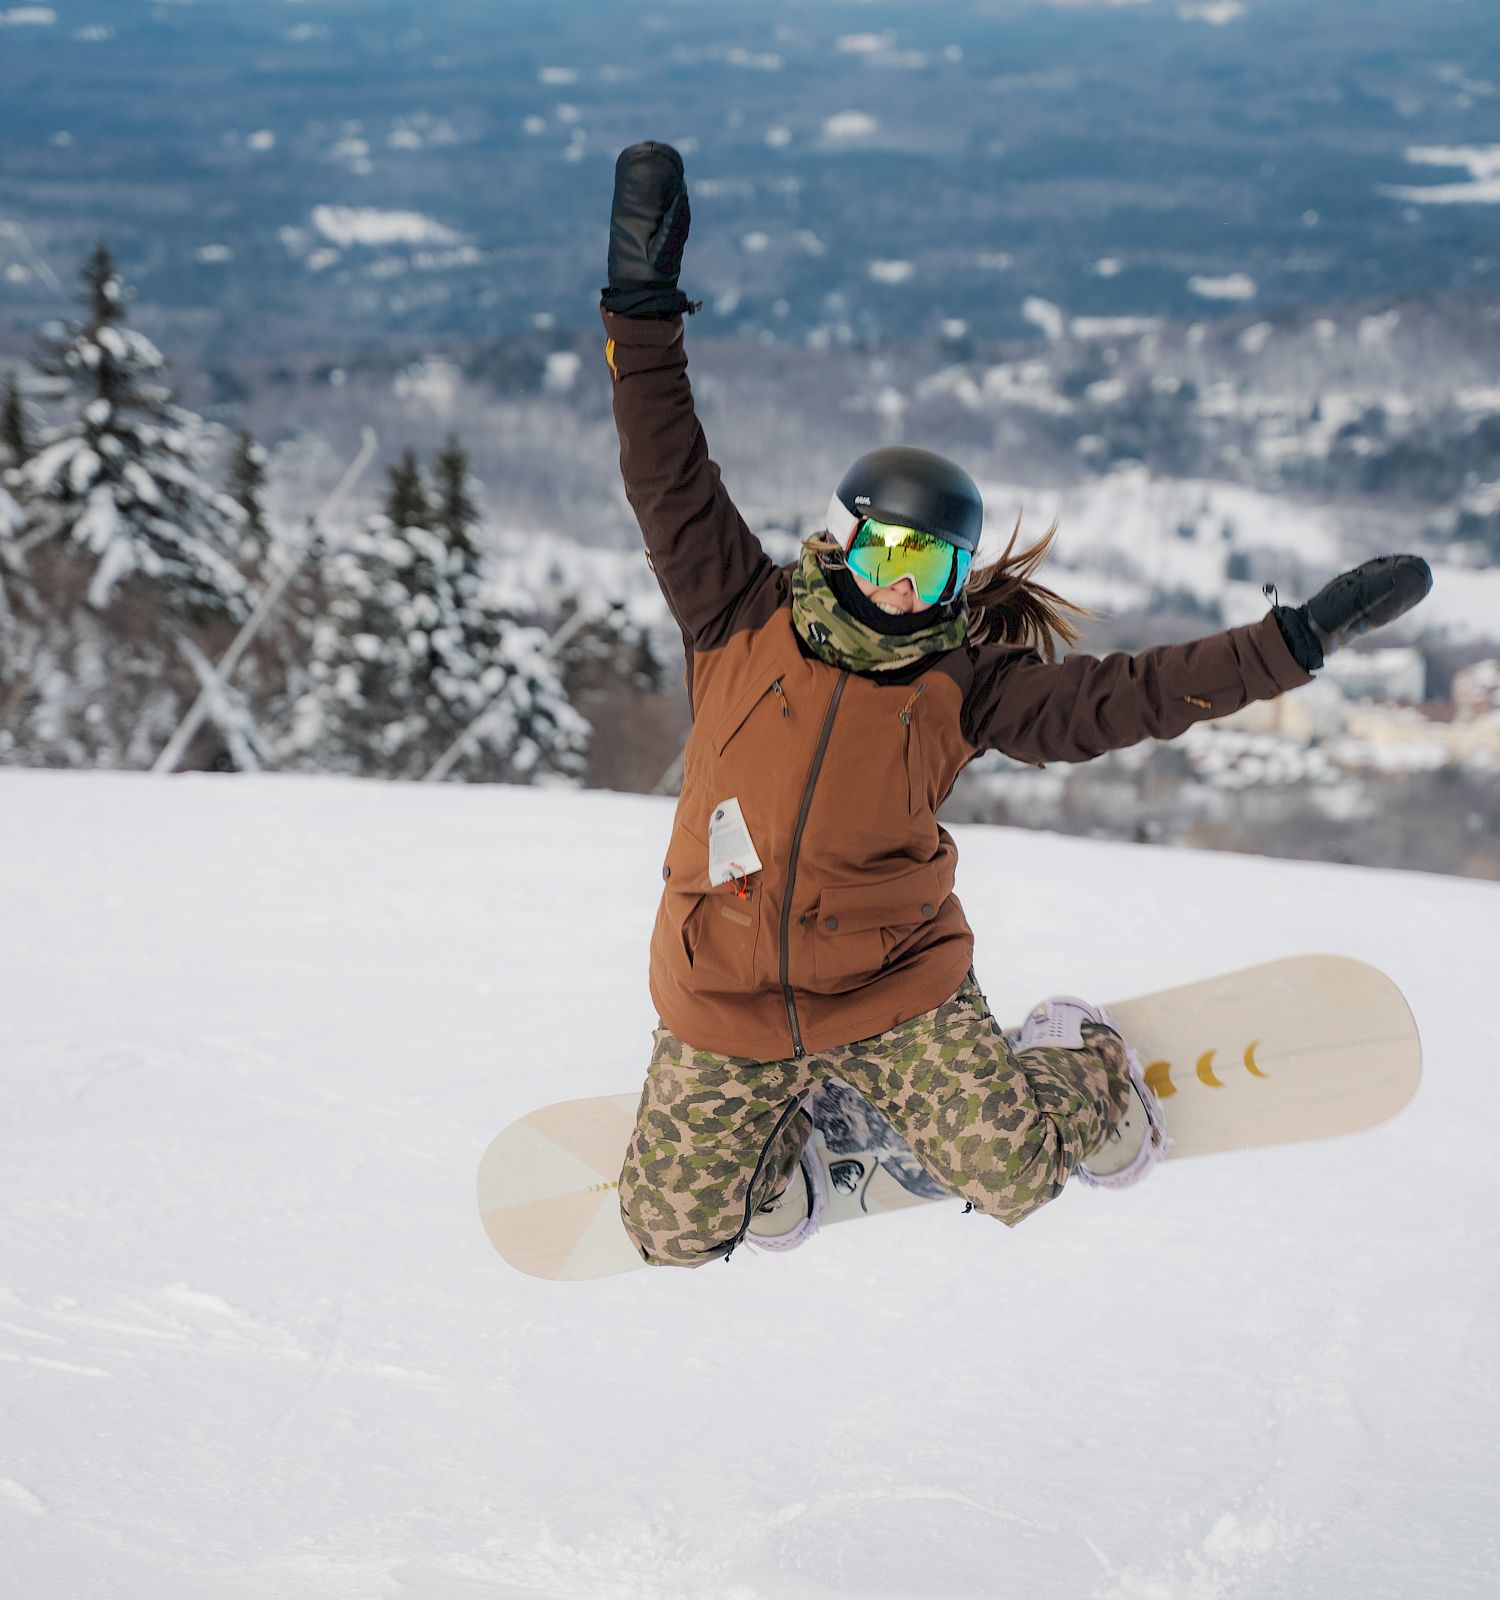 A snowboarder wearing a helmet and goggles is kneeling in the snow with arms raised in a victory pose, surrounded by a snowy mountain landscape.